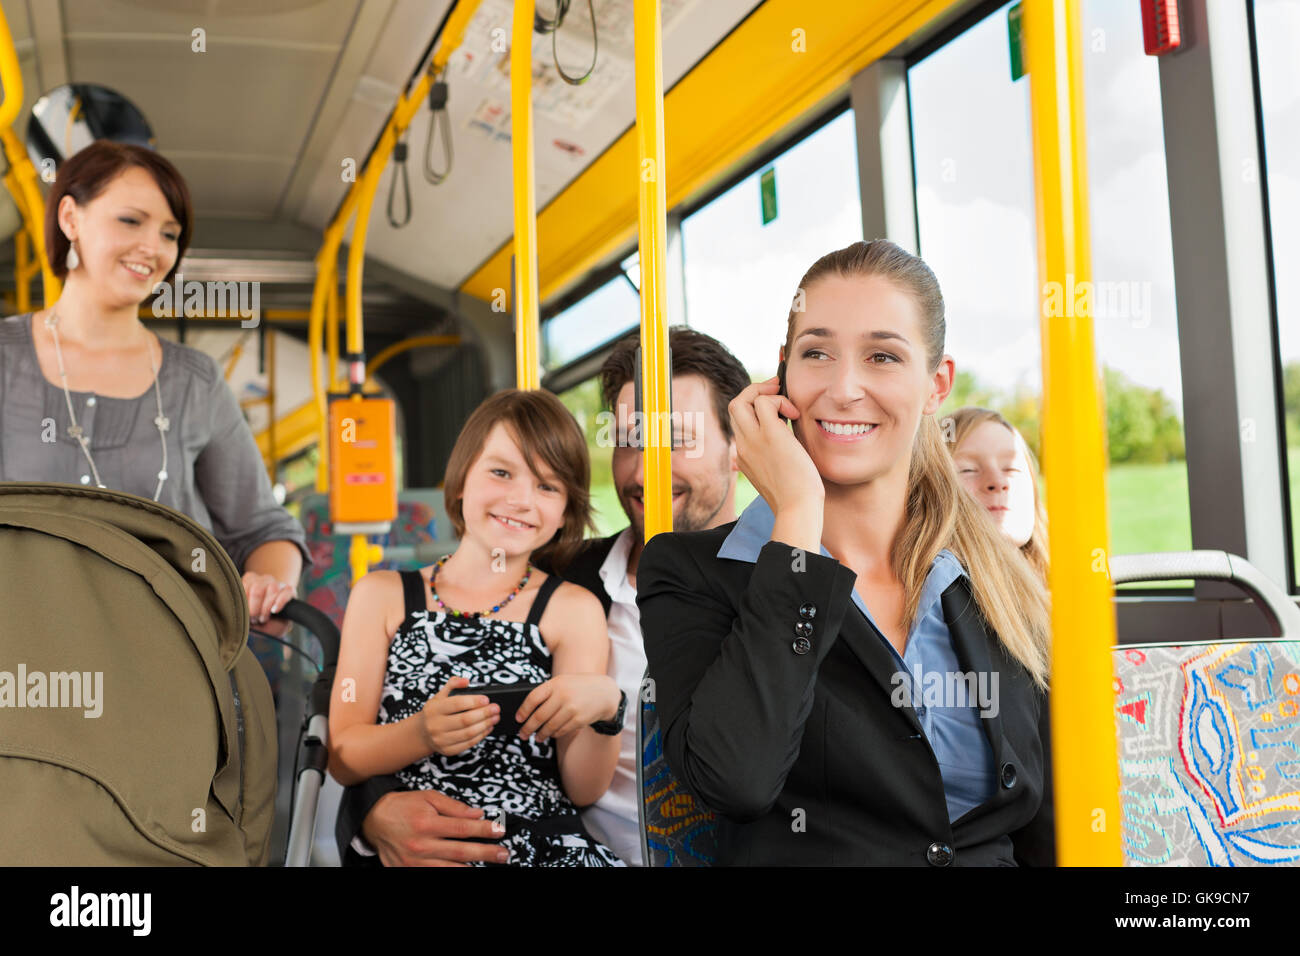 passengers in a bus Stock Photo